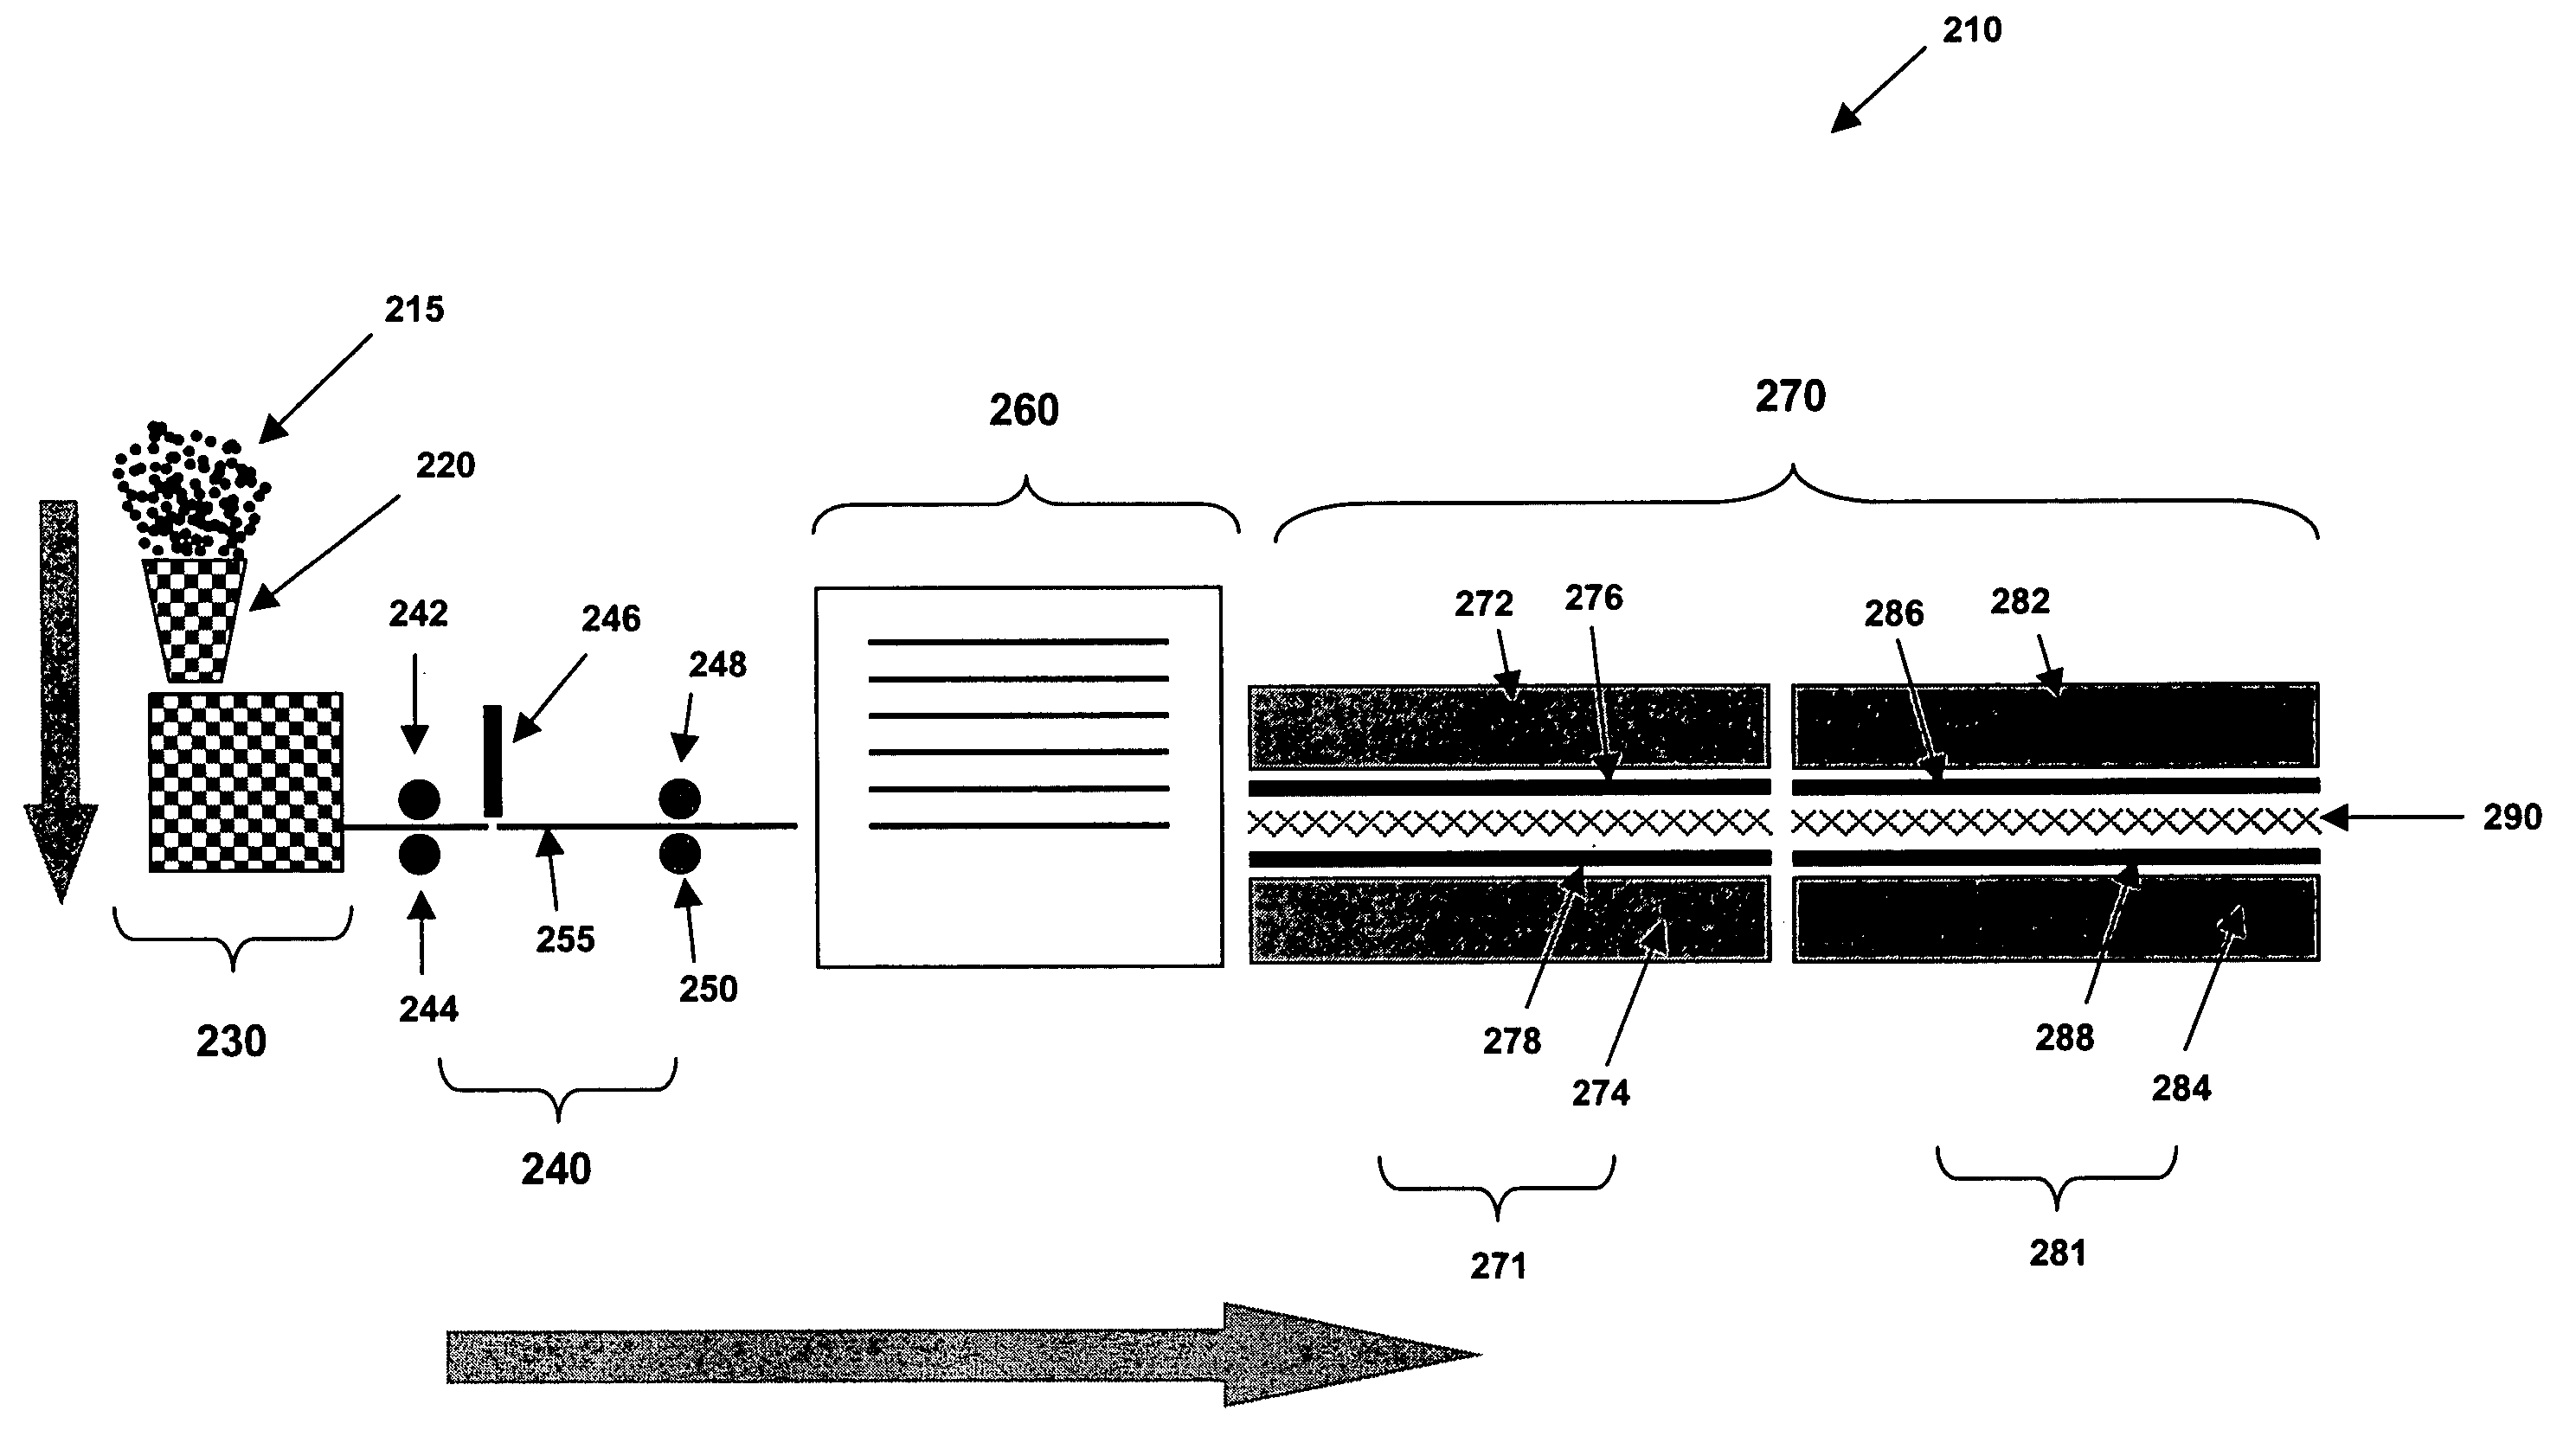 Method and apparatus for continuously producing discrete expanded thermoformable materials